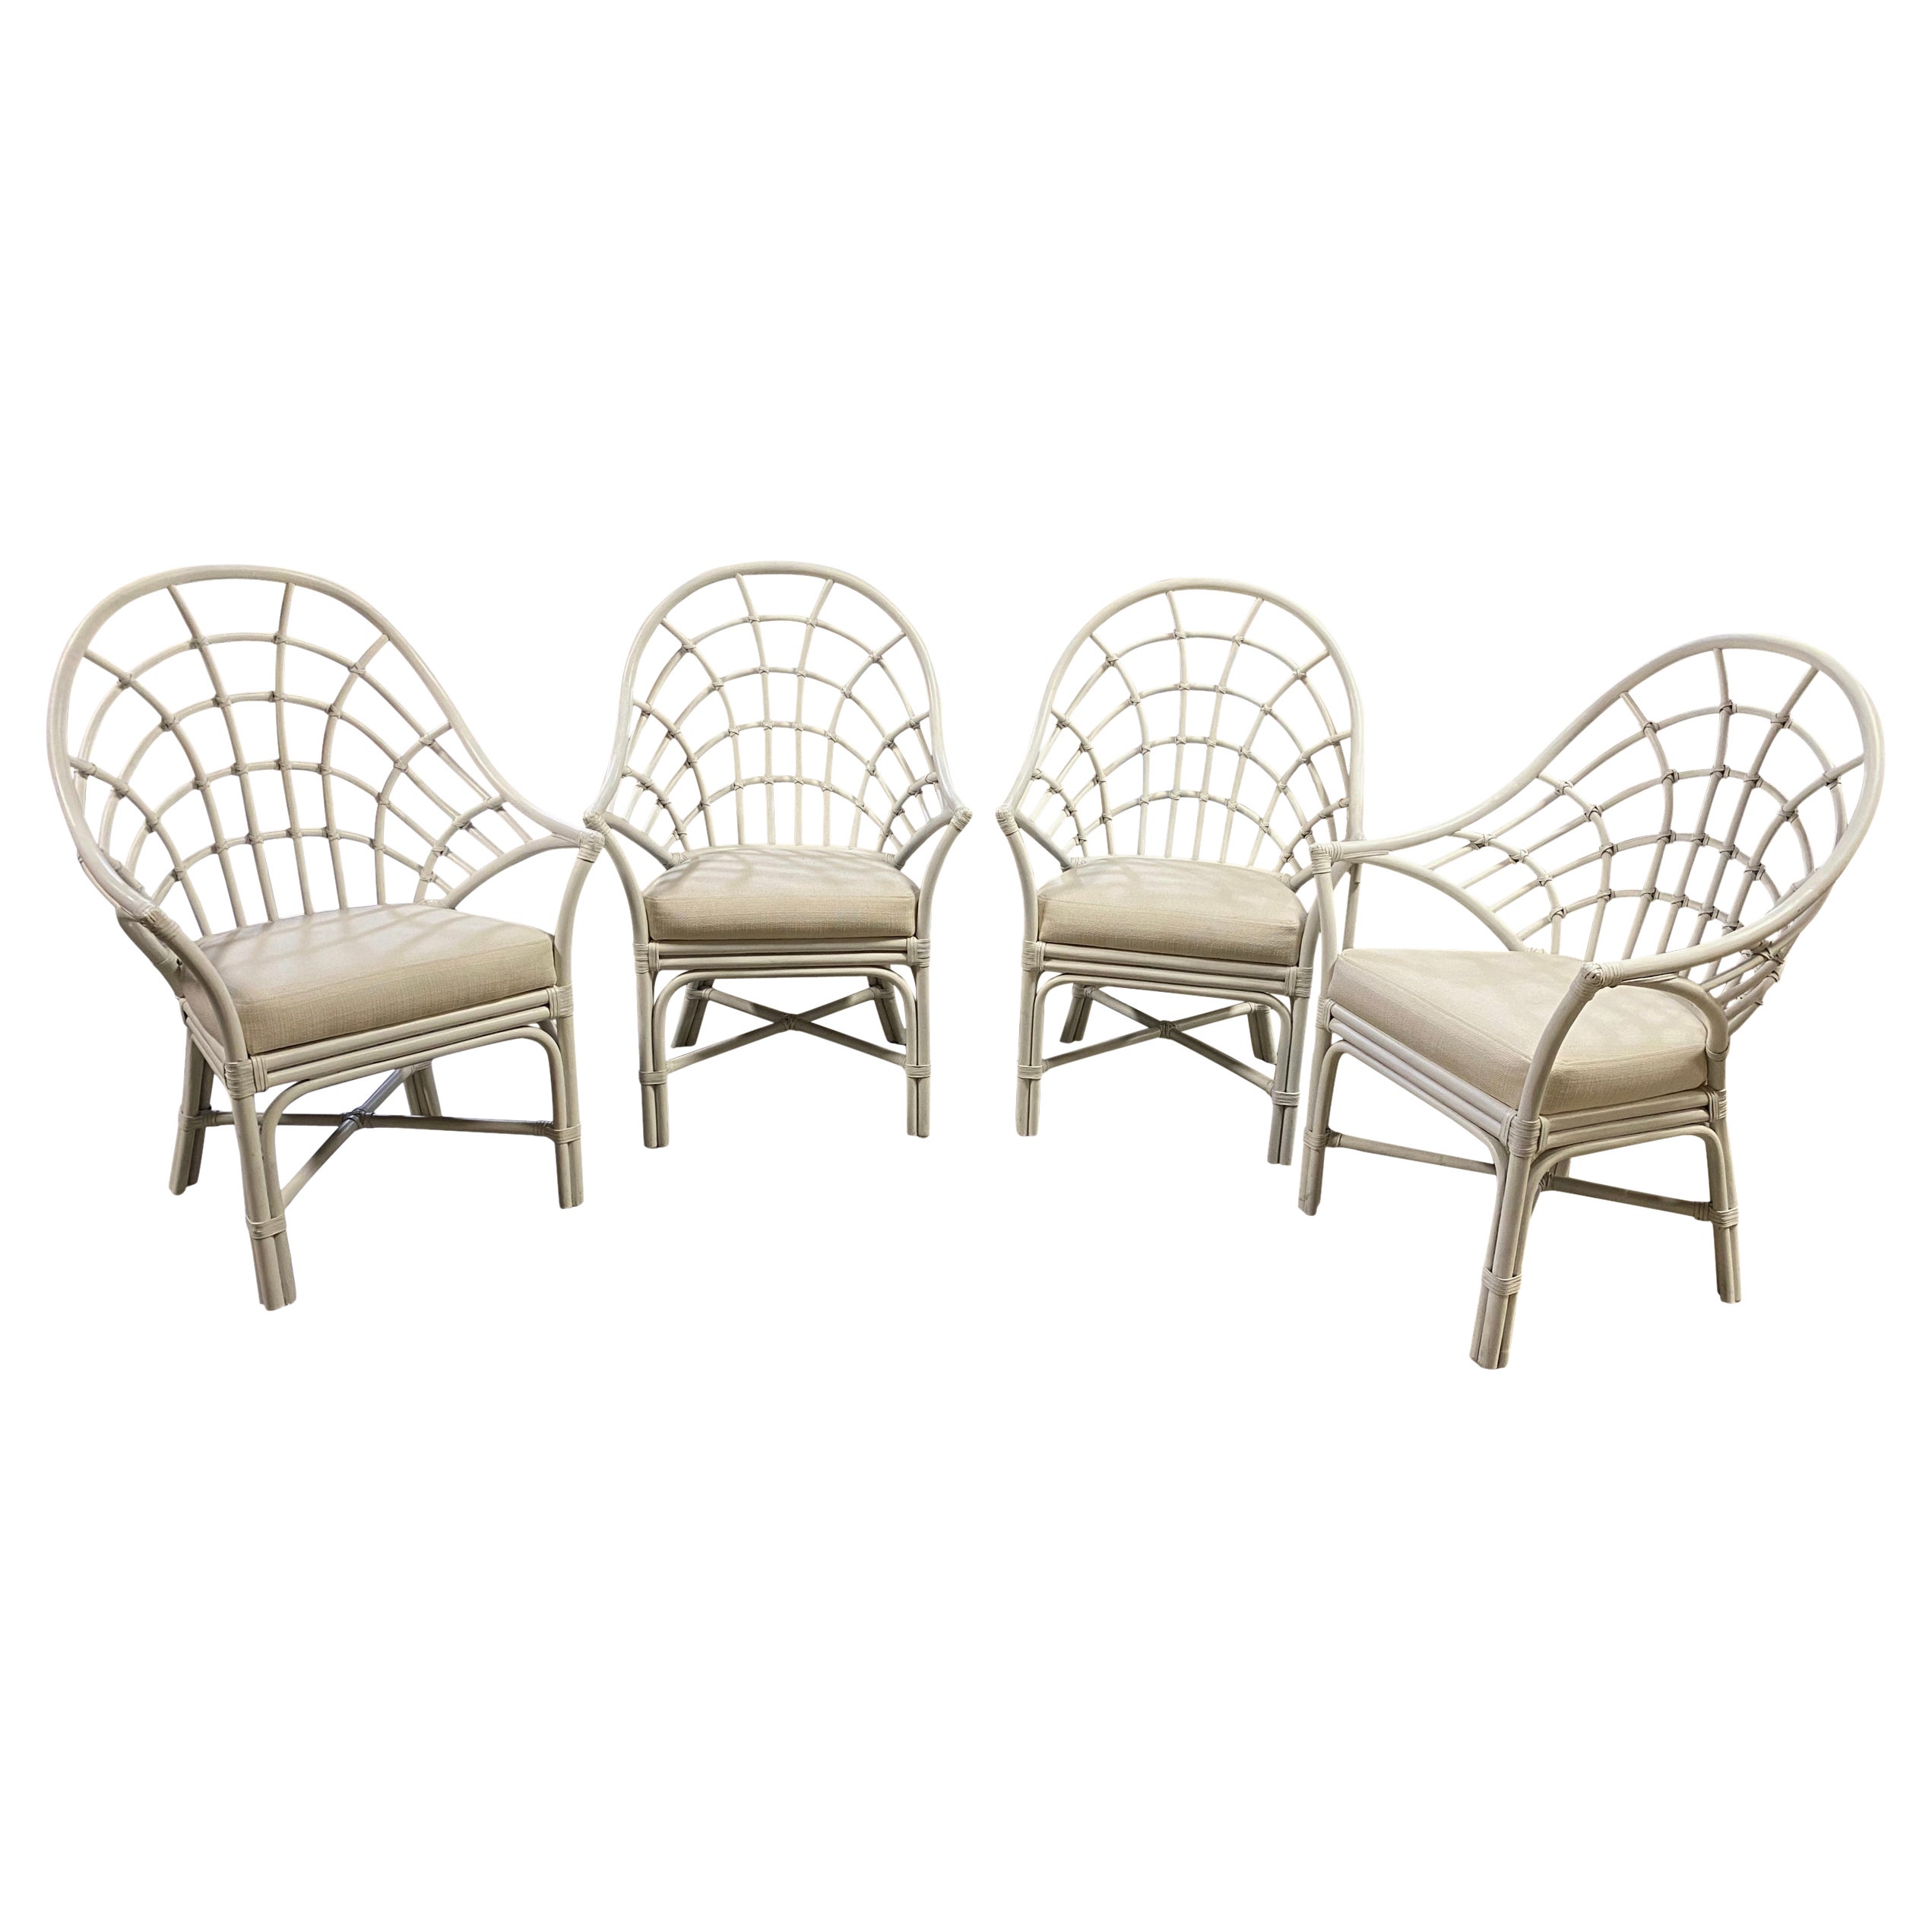 Set of 4 White Rattan Pencil Reed Fan Back Dining Chairs